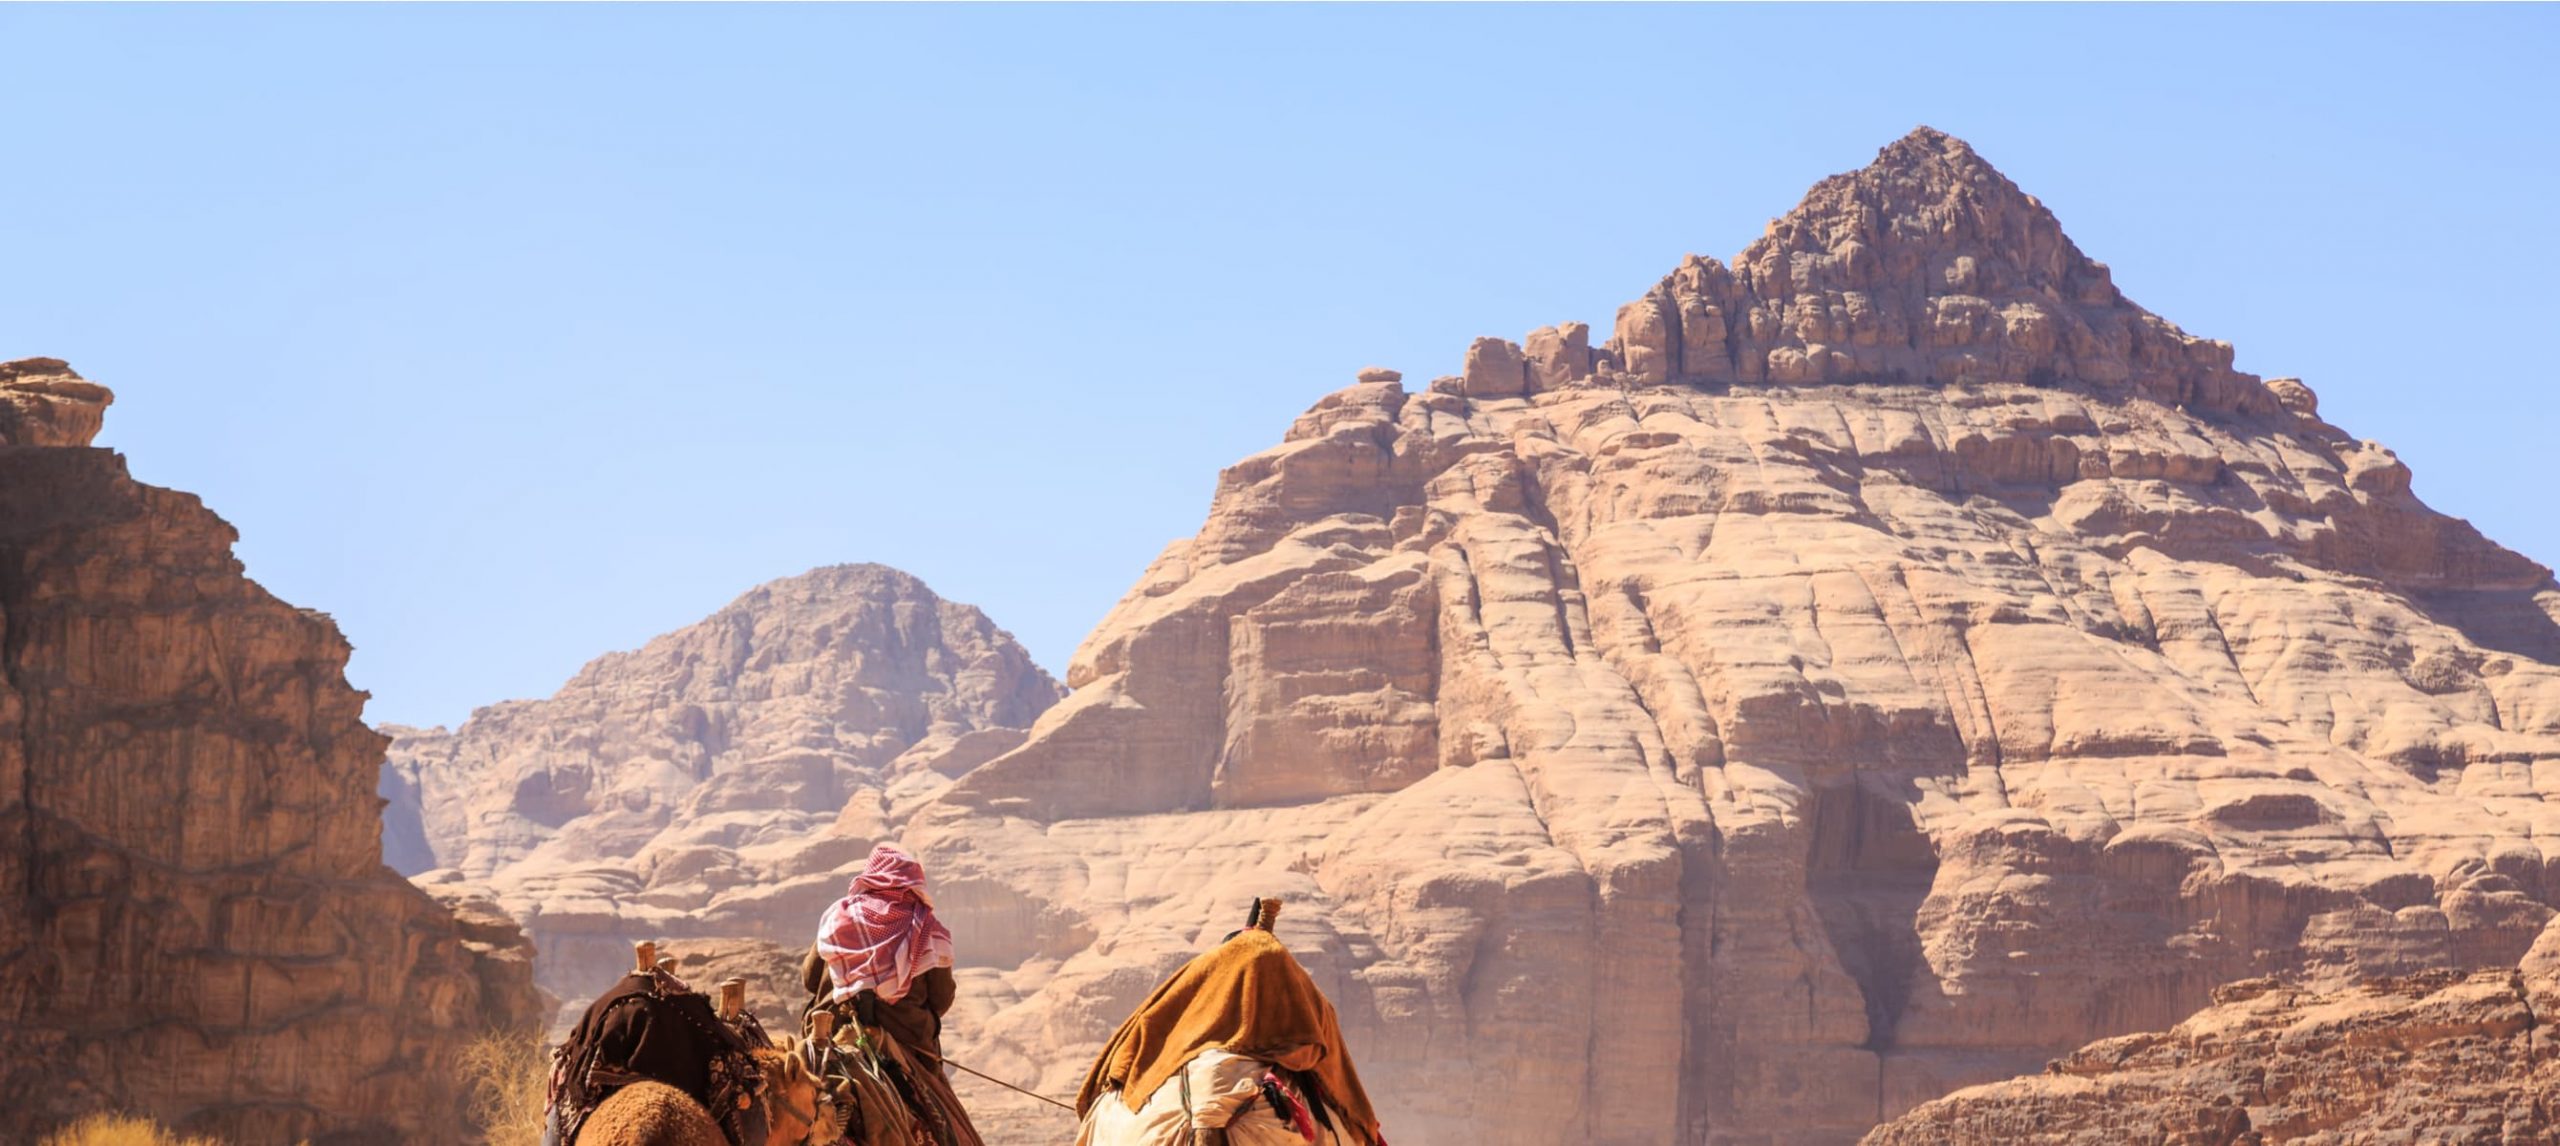 Wadi Rum mountains and two males riding a camel in Jordan